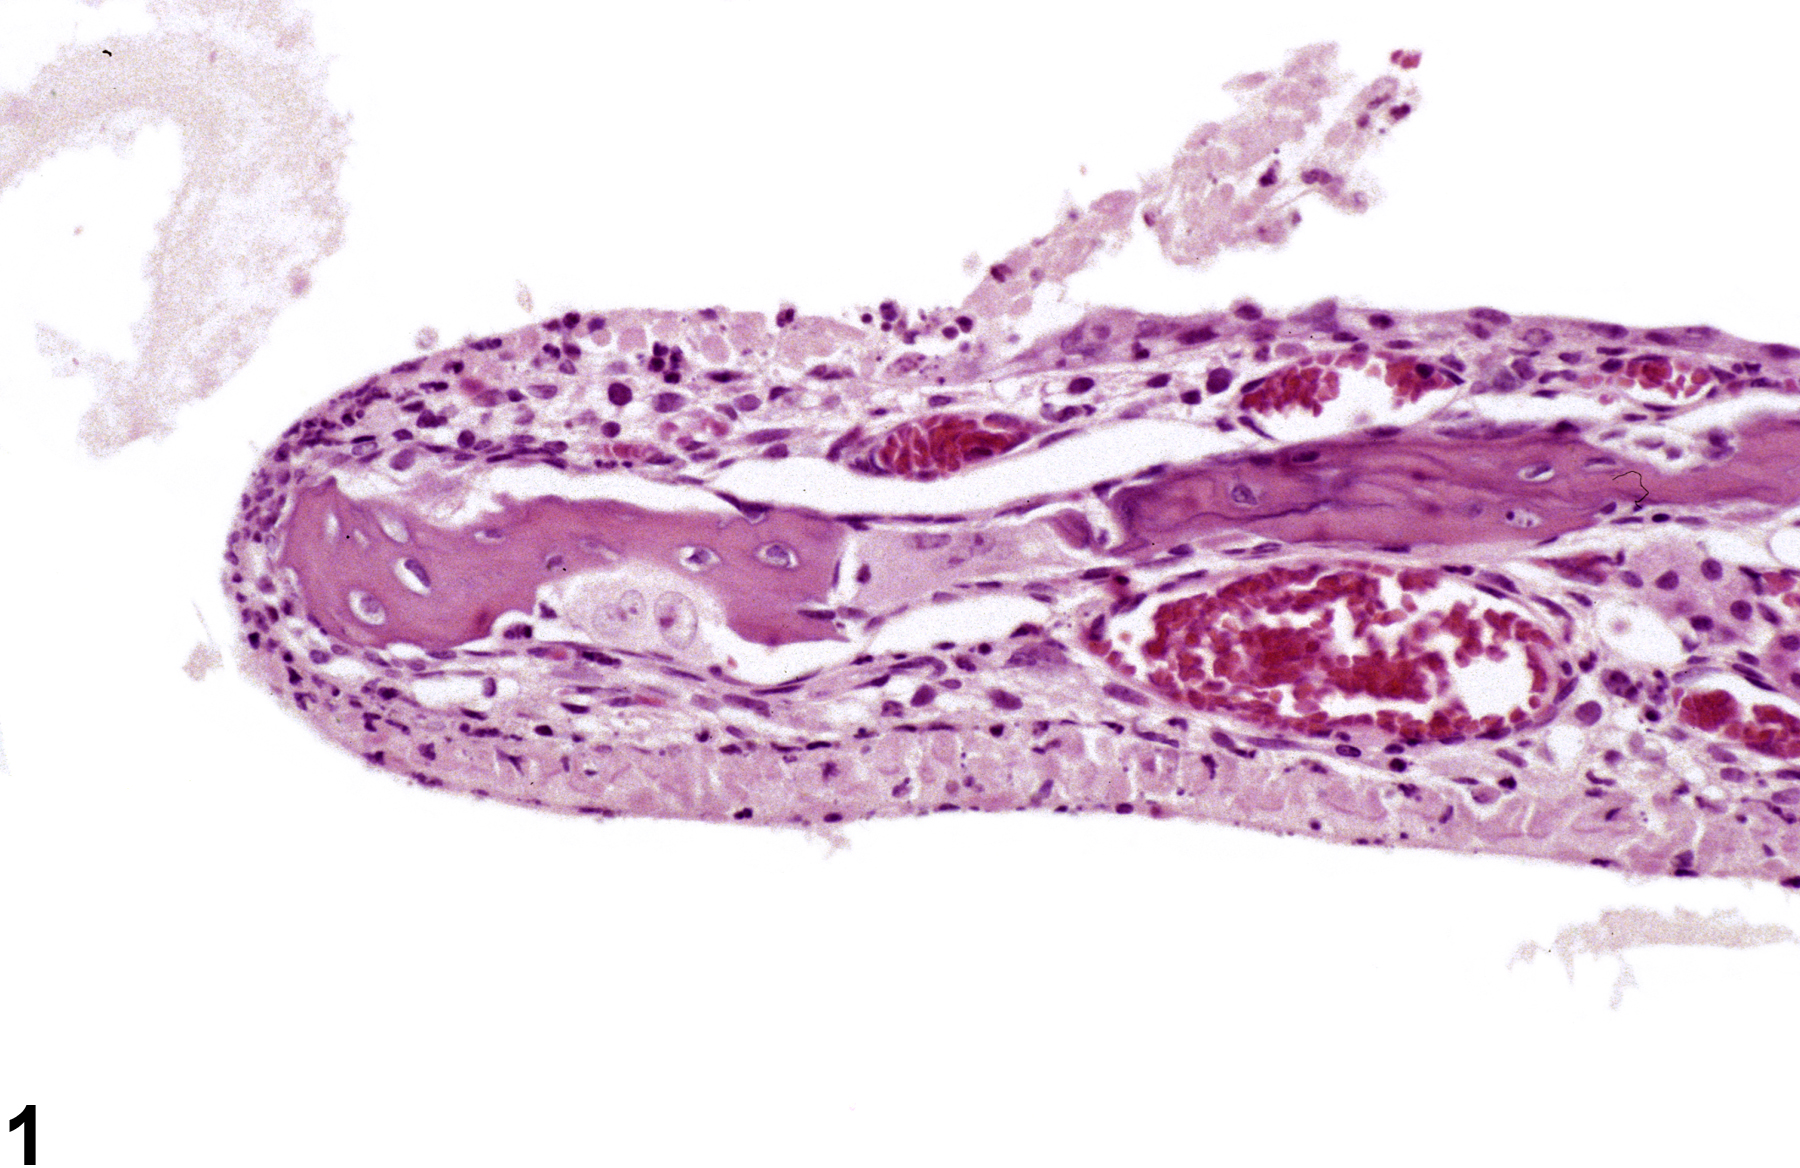 Image of necrosis in the nose, transitional epithelium from a female B6C3F1/N mouse in a subchronic study